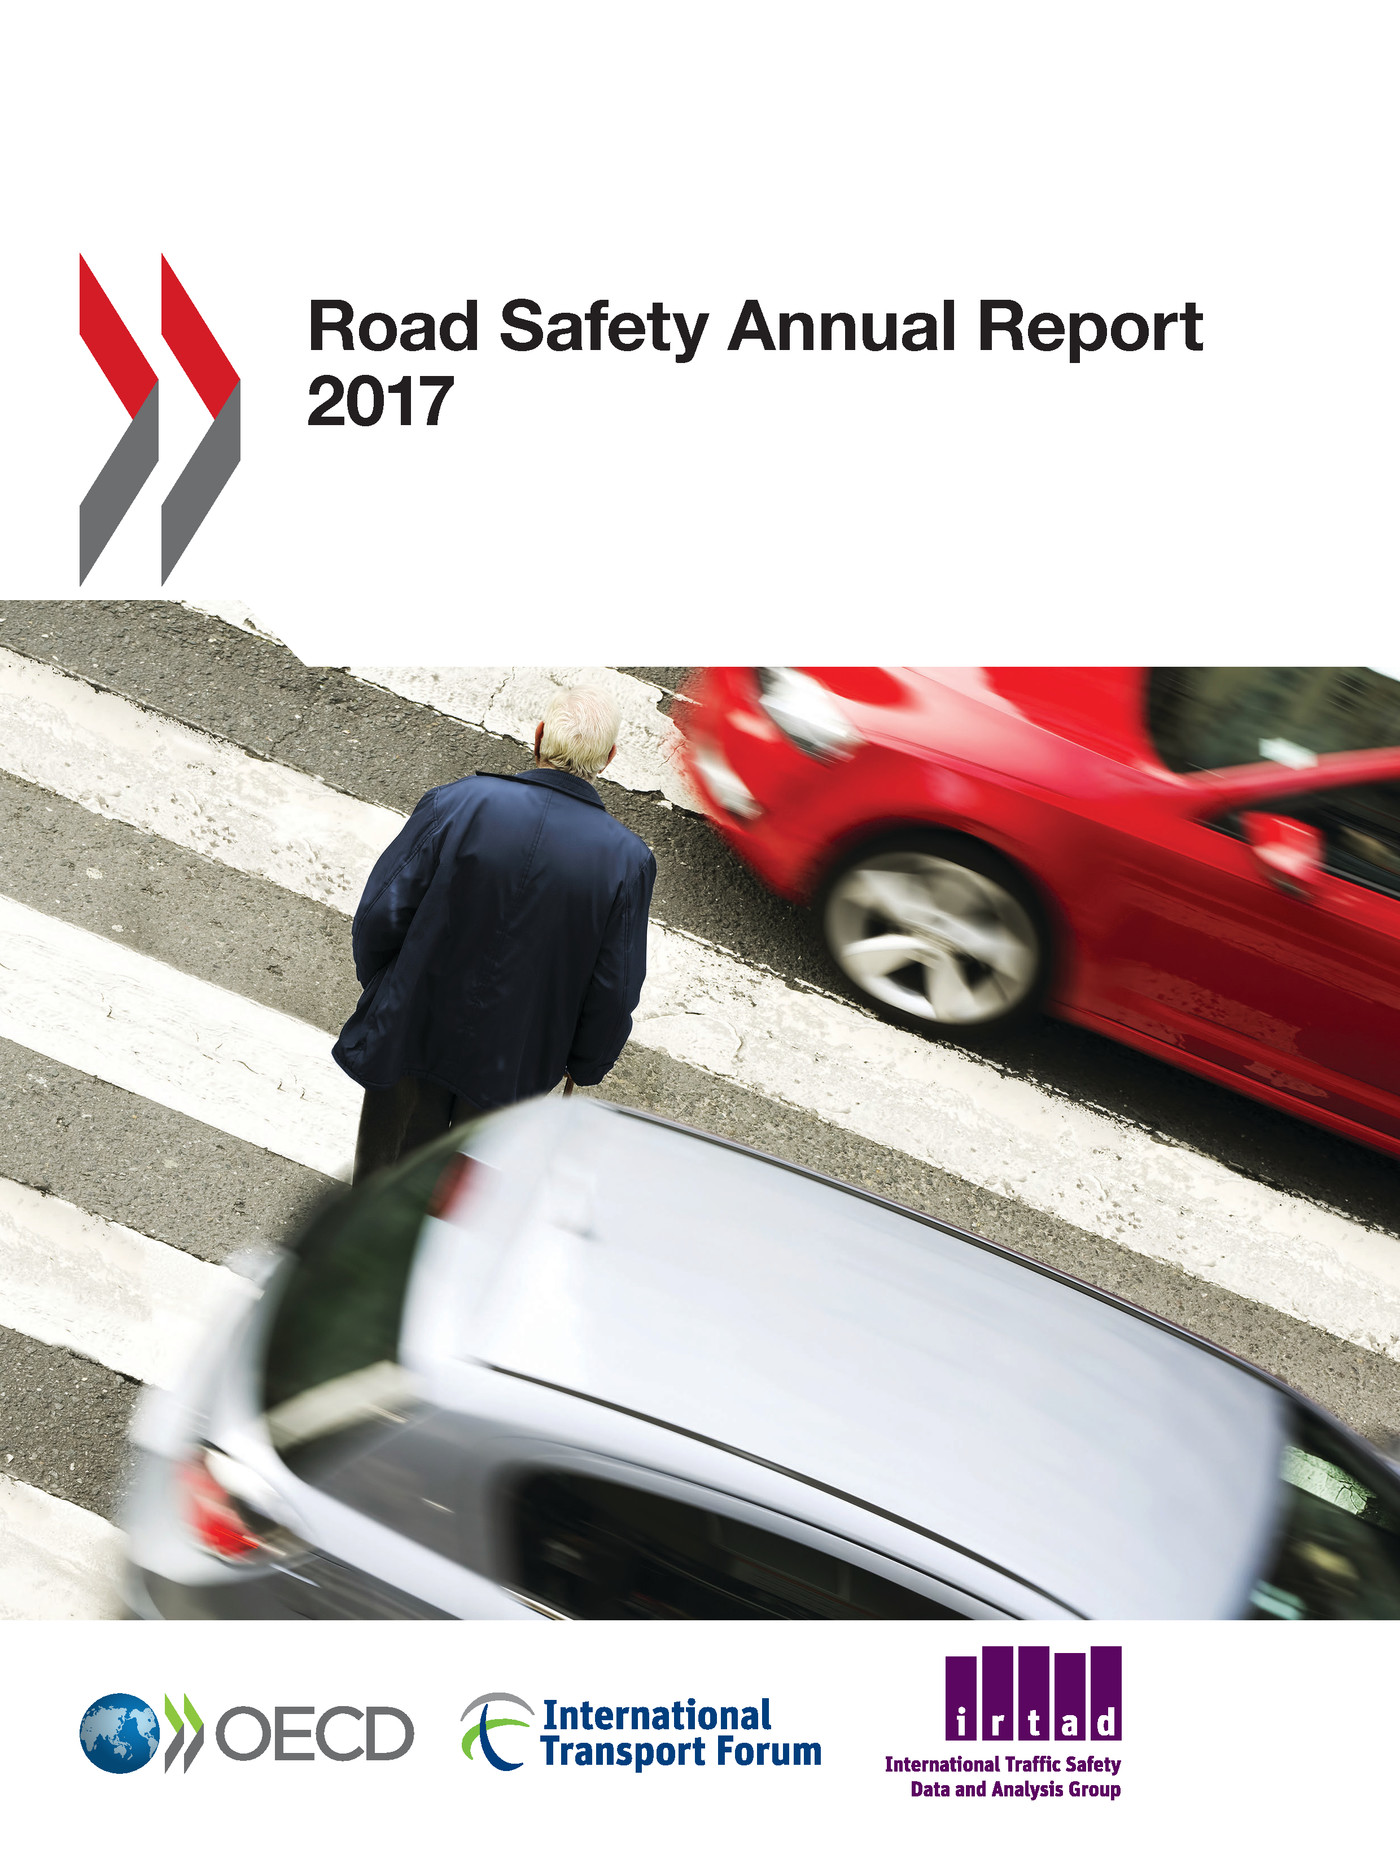 Road Safety Annual Report 2017 -  Collectif - OCDE / OECD